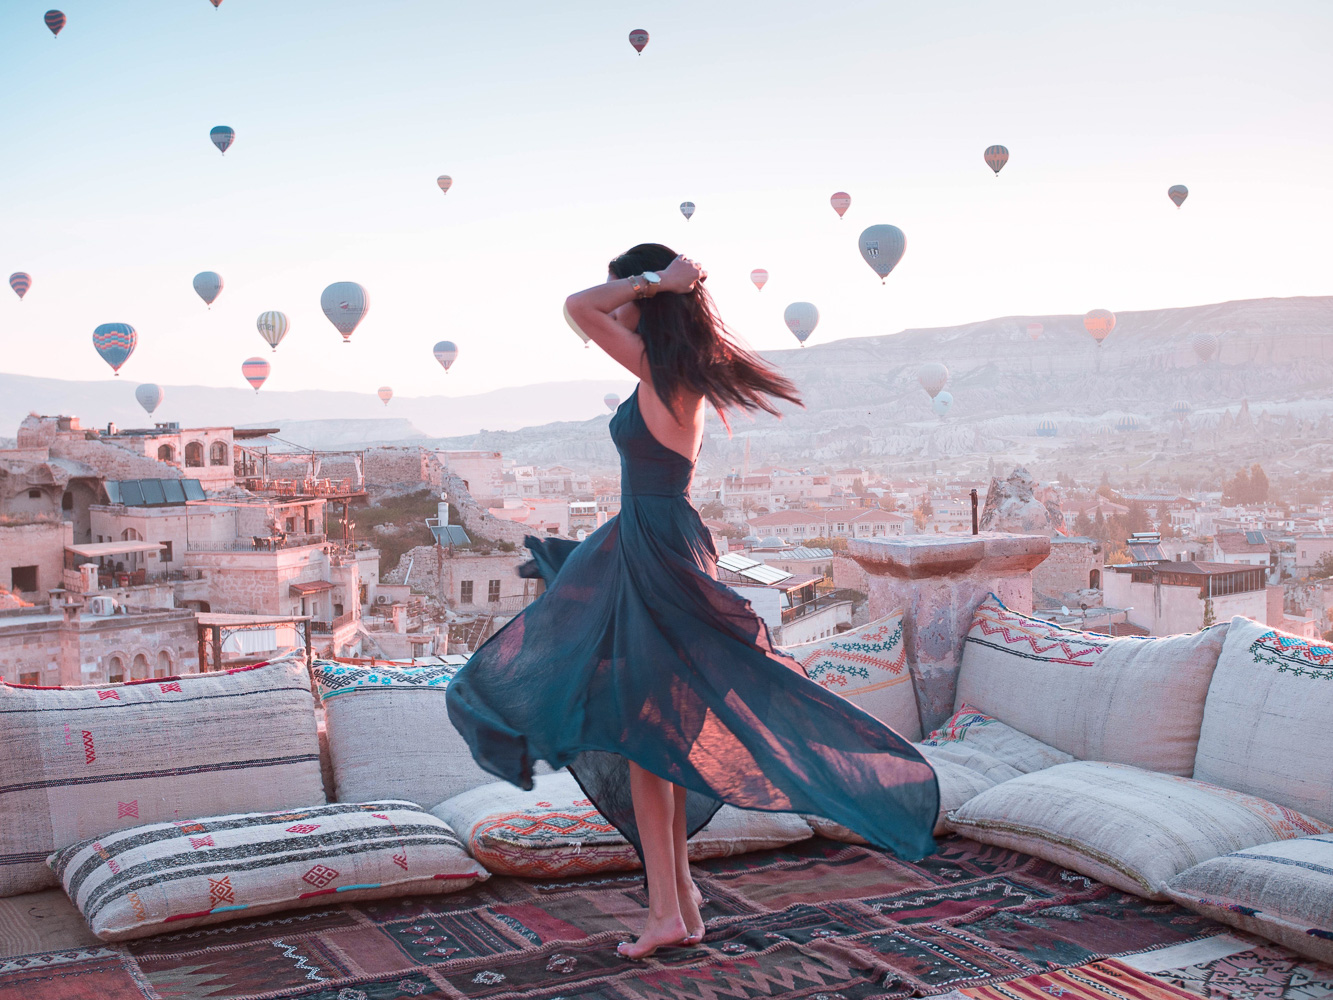 Travel influencer @theboldbrunette twirlin' around in her favorite place of all time